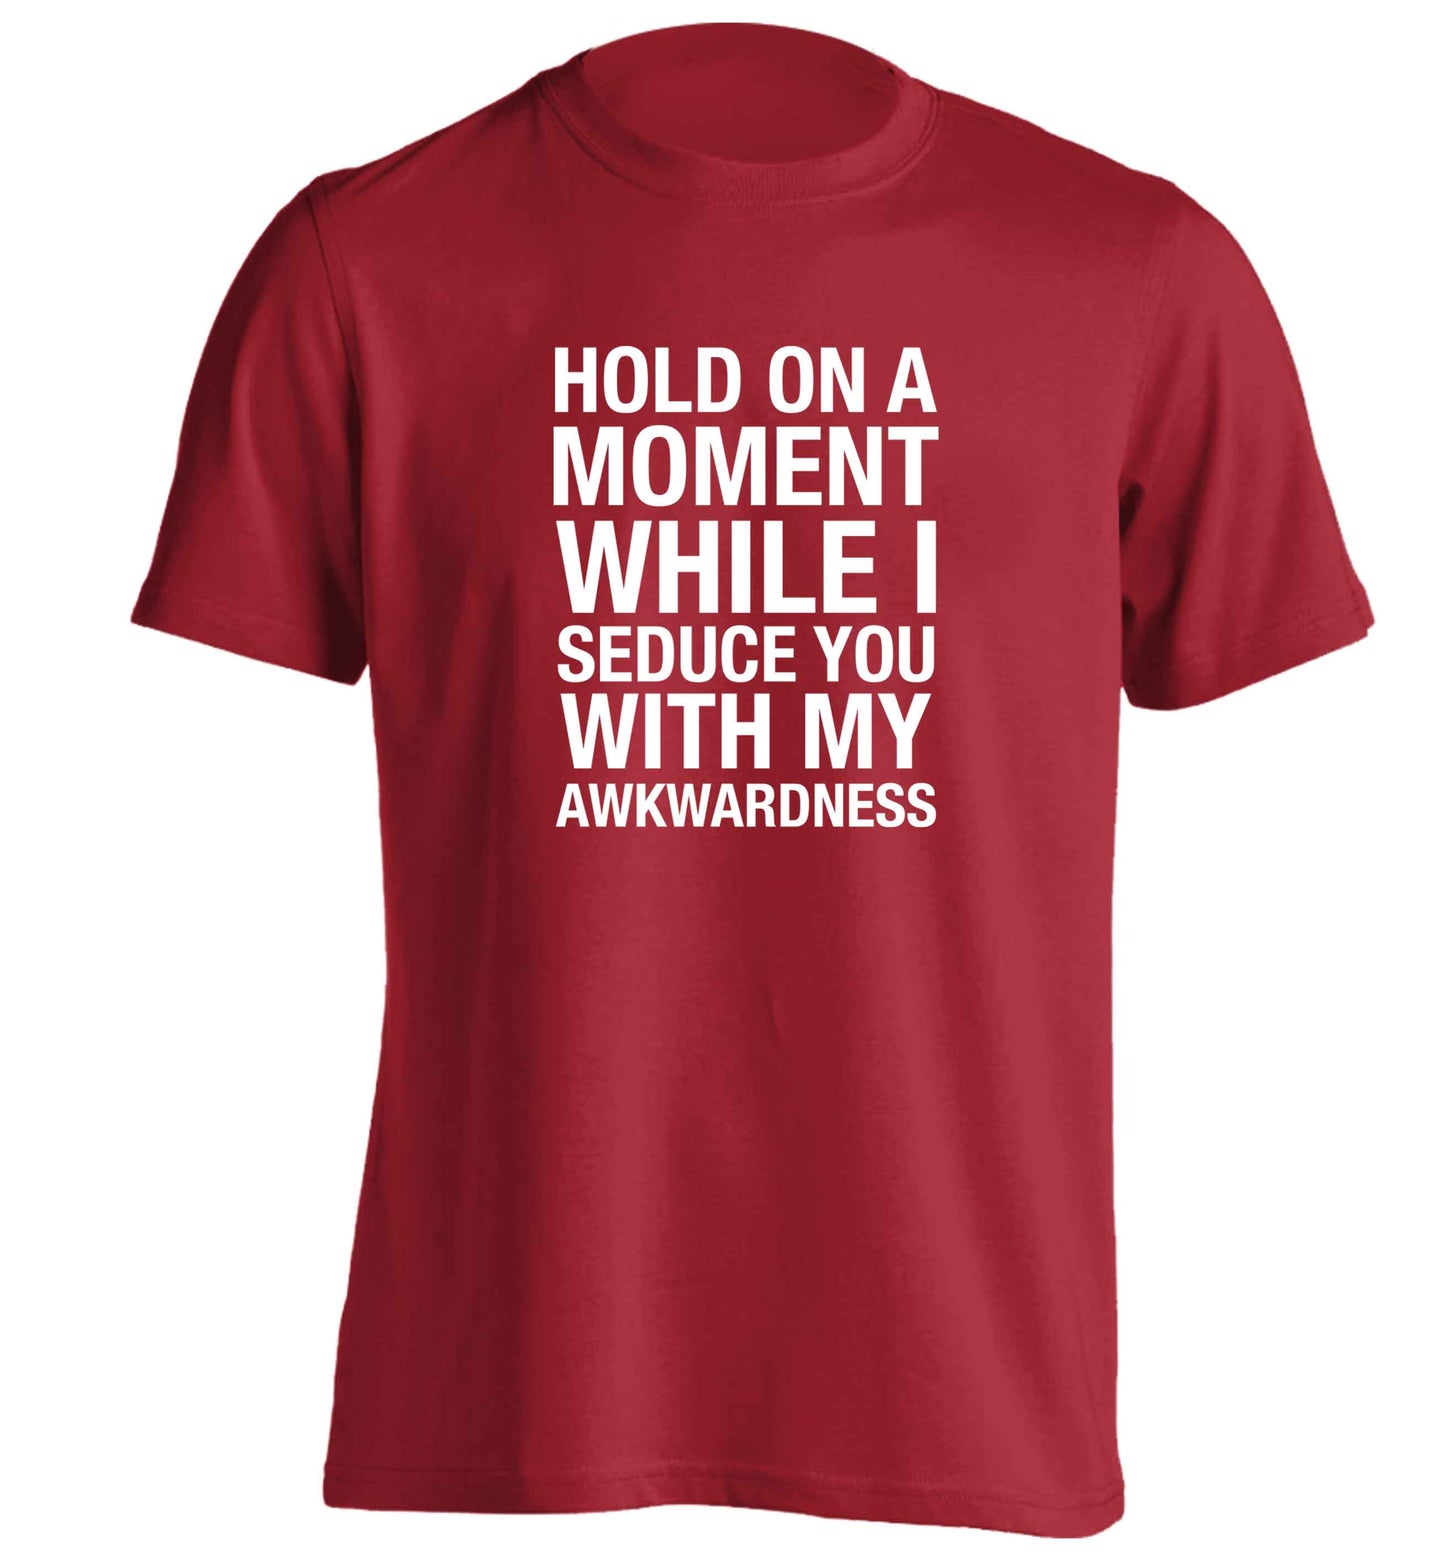 Hold on a moment while I seduce you with my awkwardness adults unisex red Tshirt 2XL